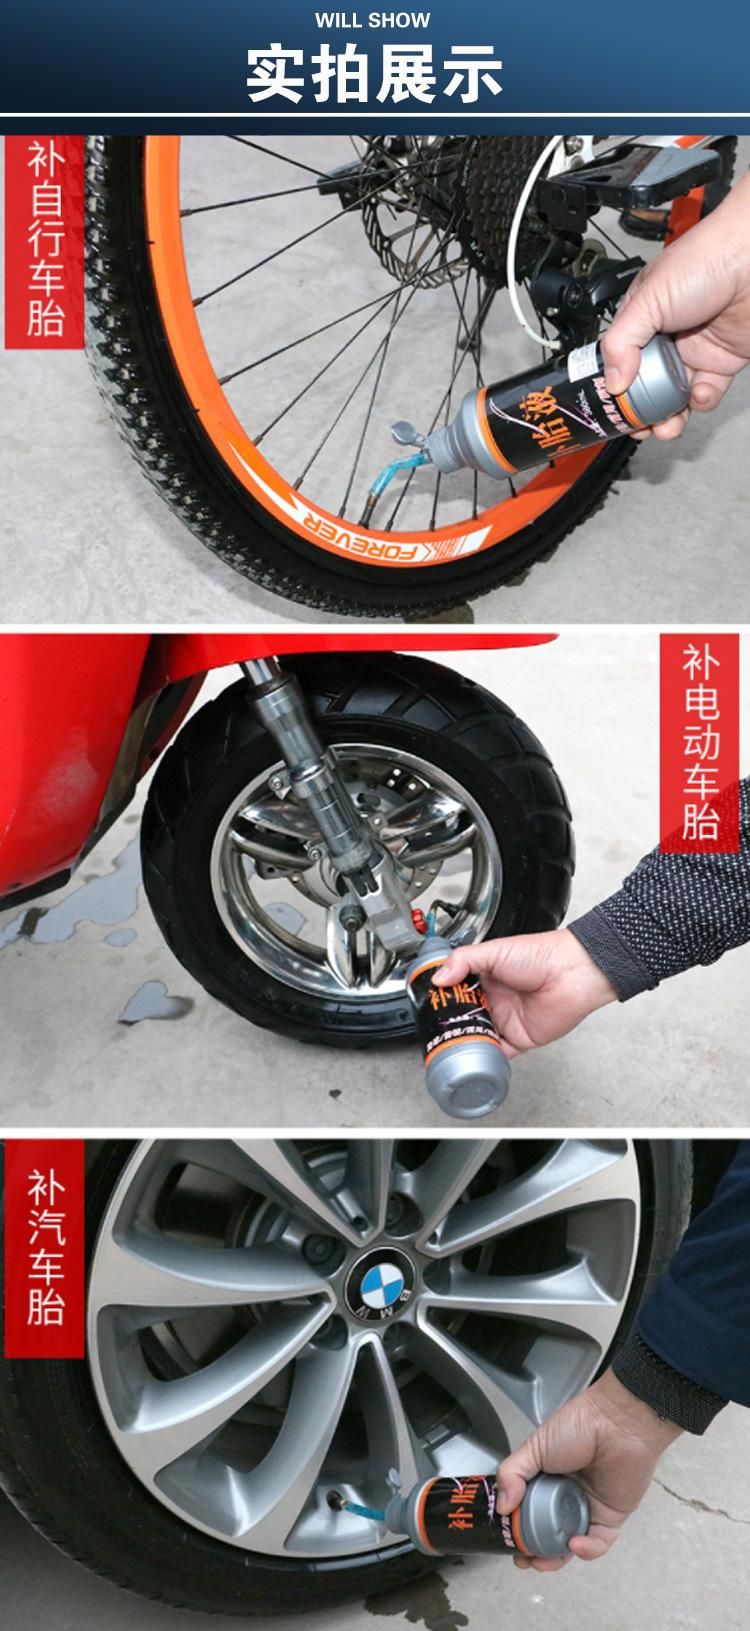 Wholesale Effective Tire Puncture Repair Sealant for Vehicle Tire Sealant Auto and Motorcycle Bike Tyre Sealant